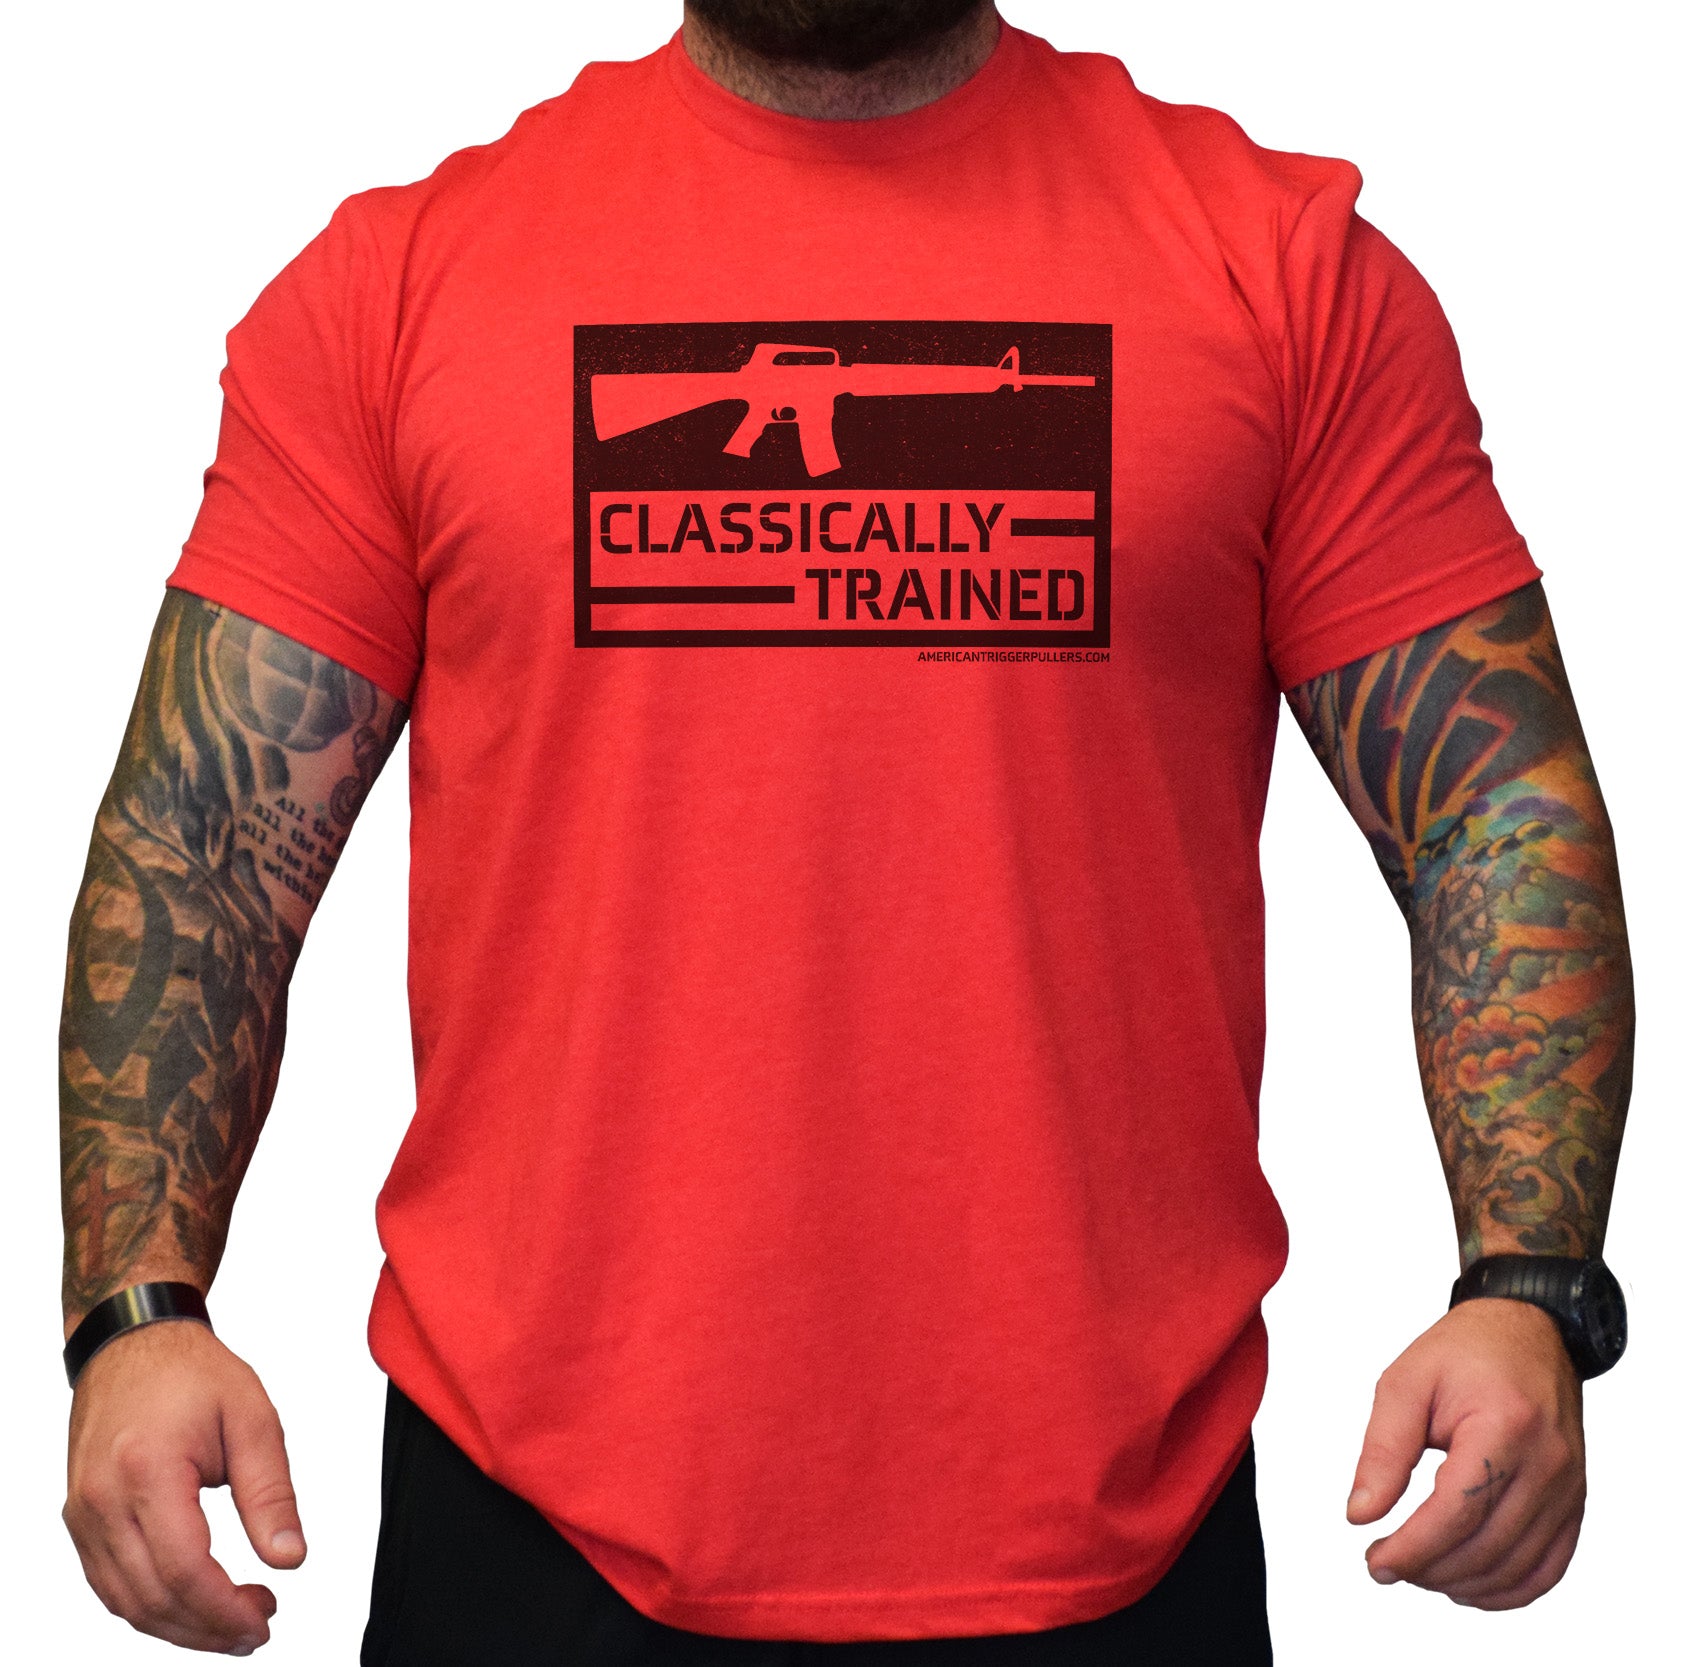 Classically Trained - M16